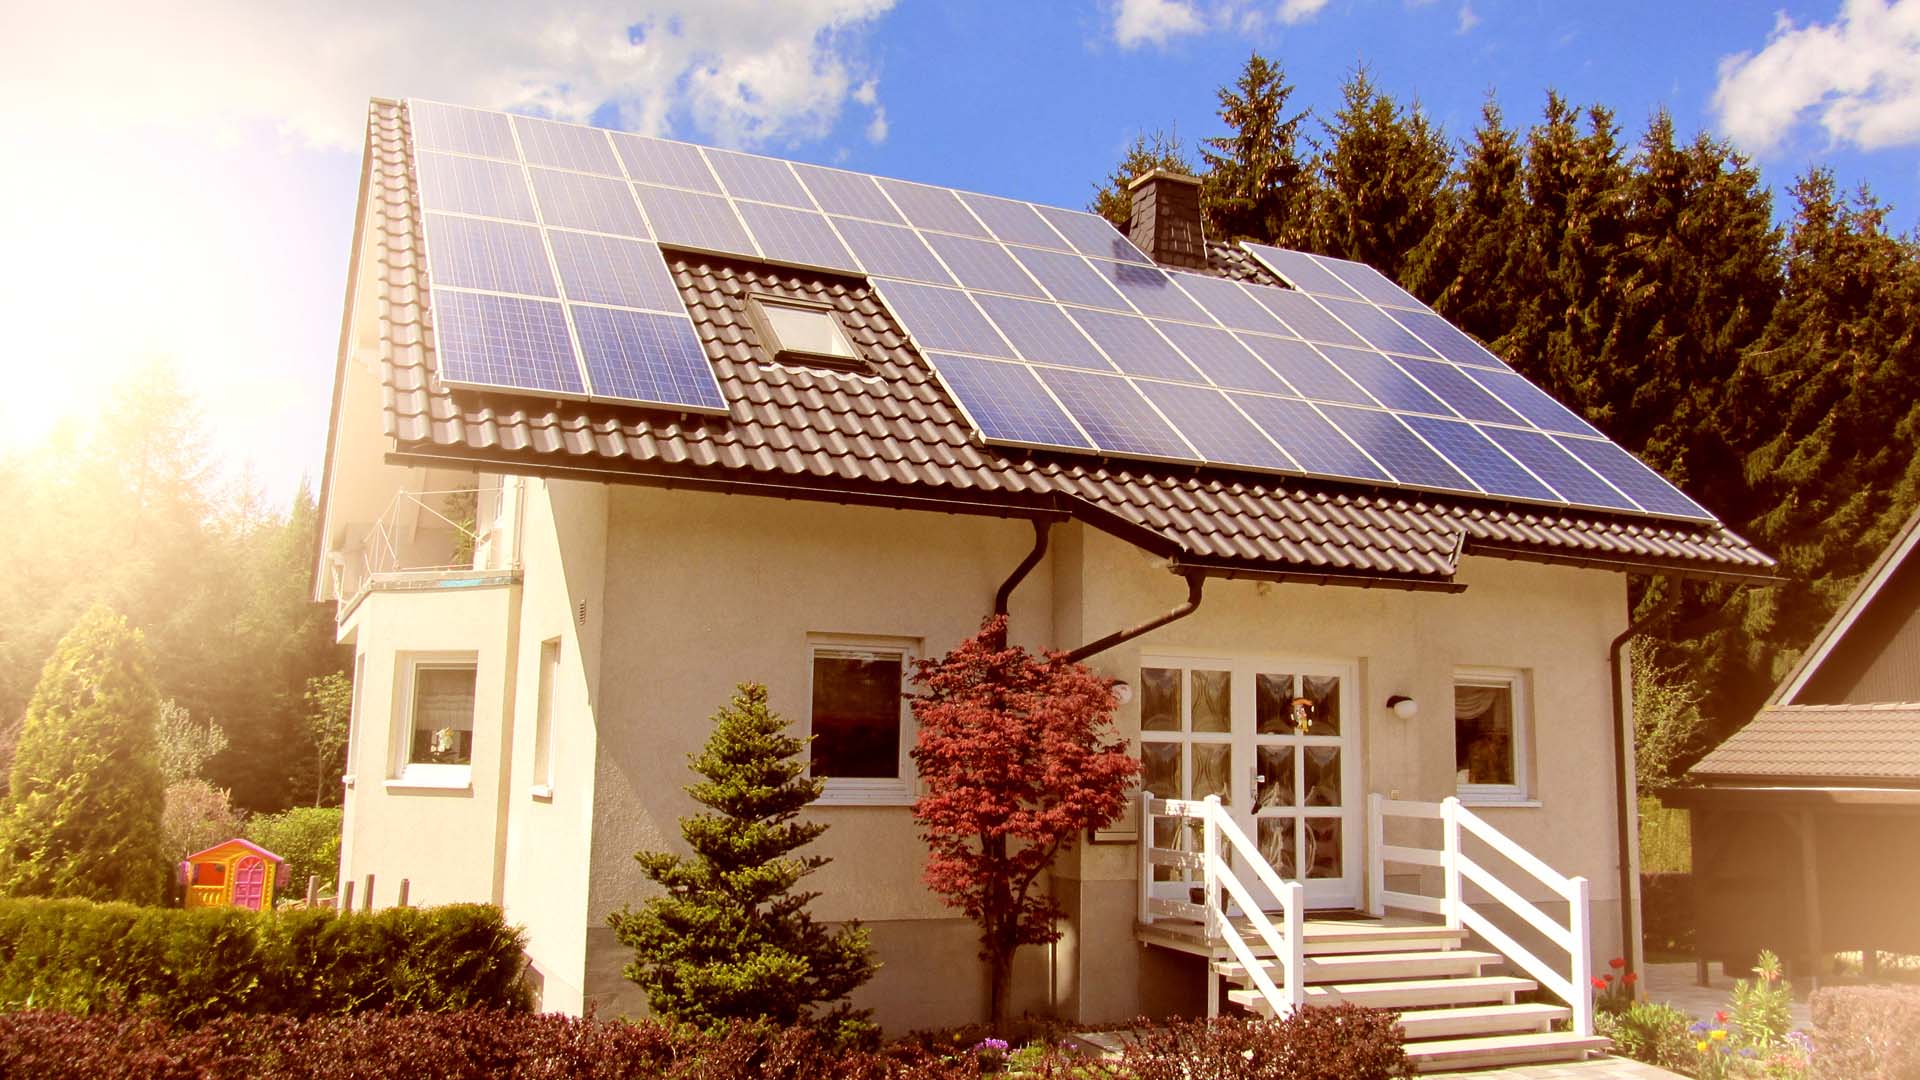 Why are solar panels so expensive?